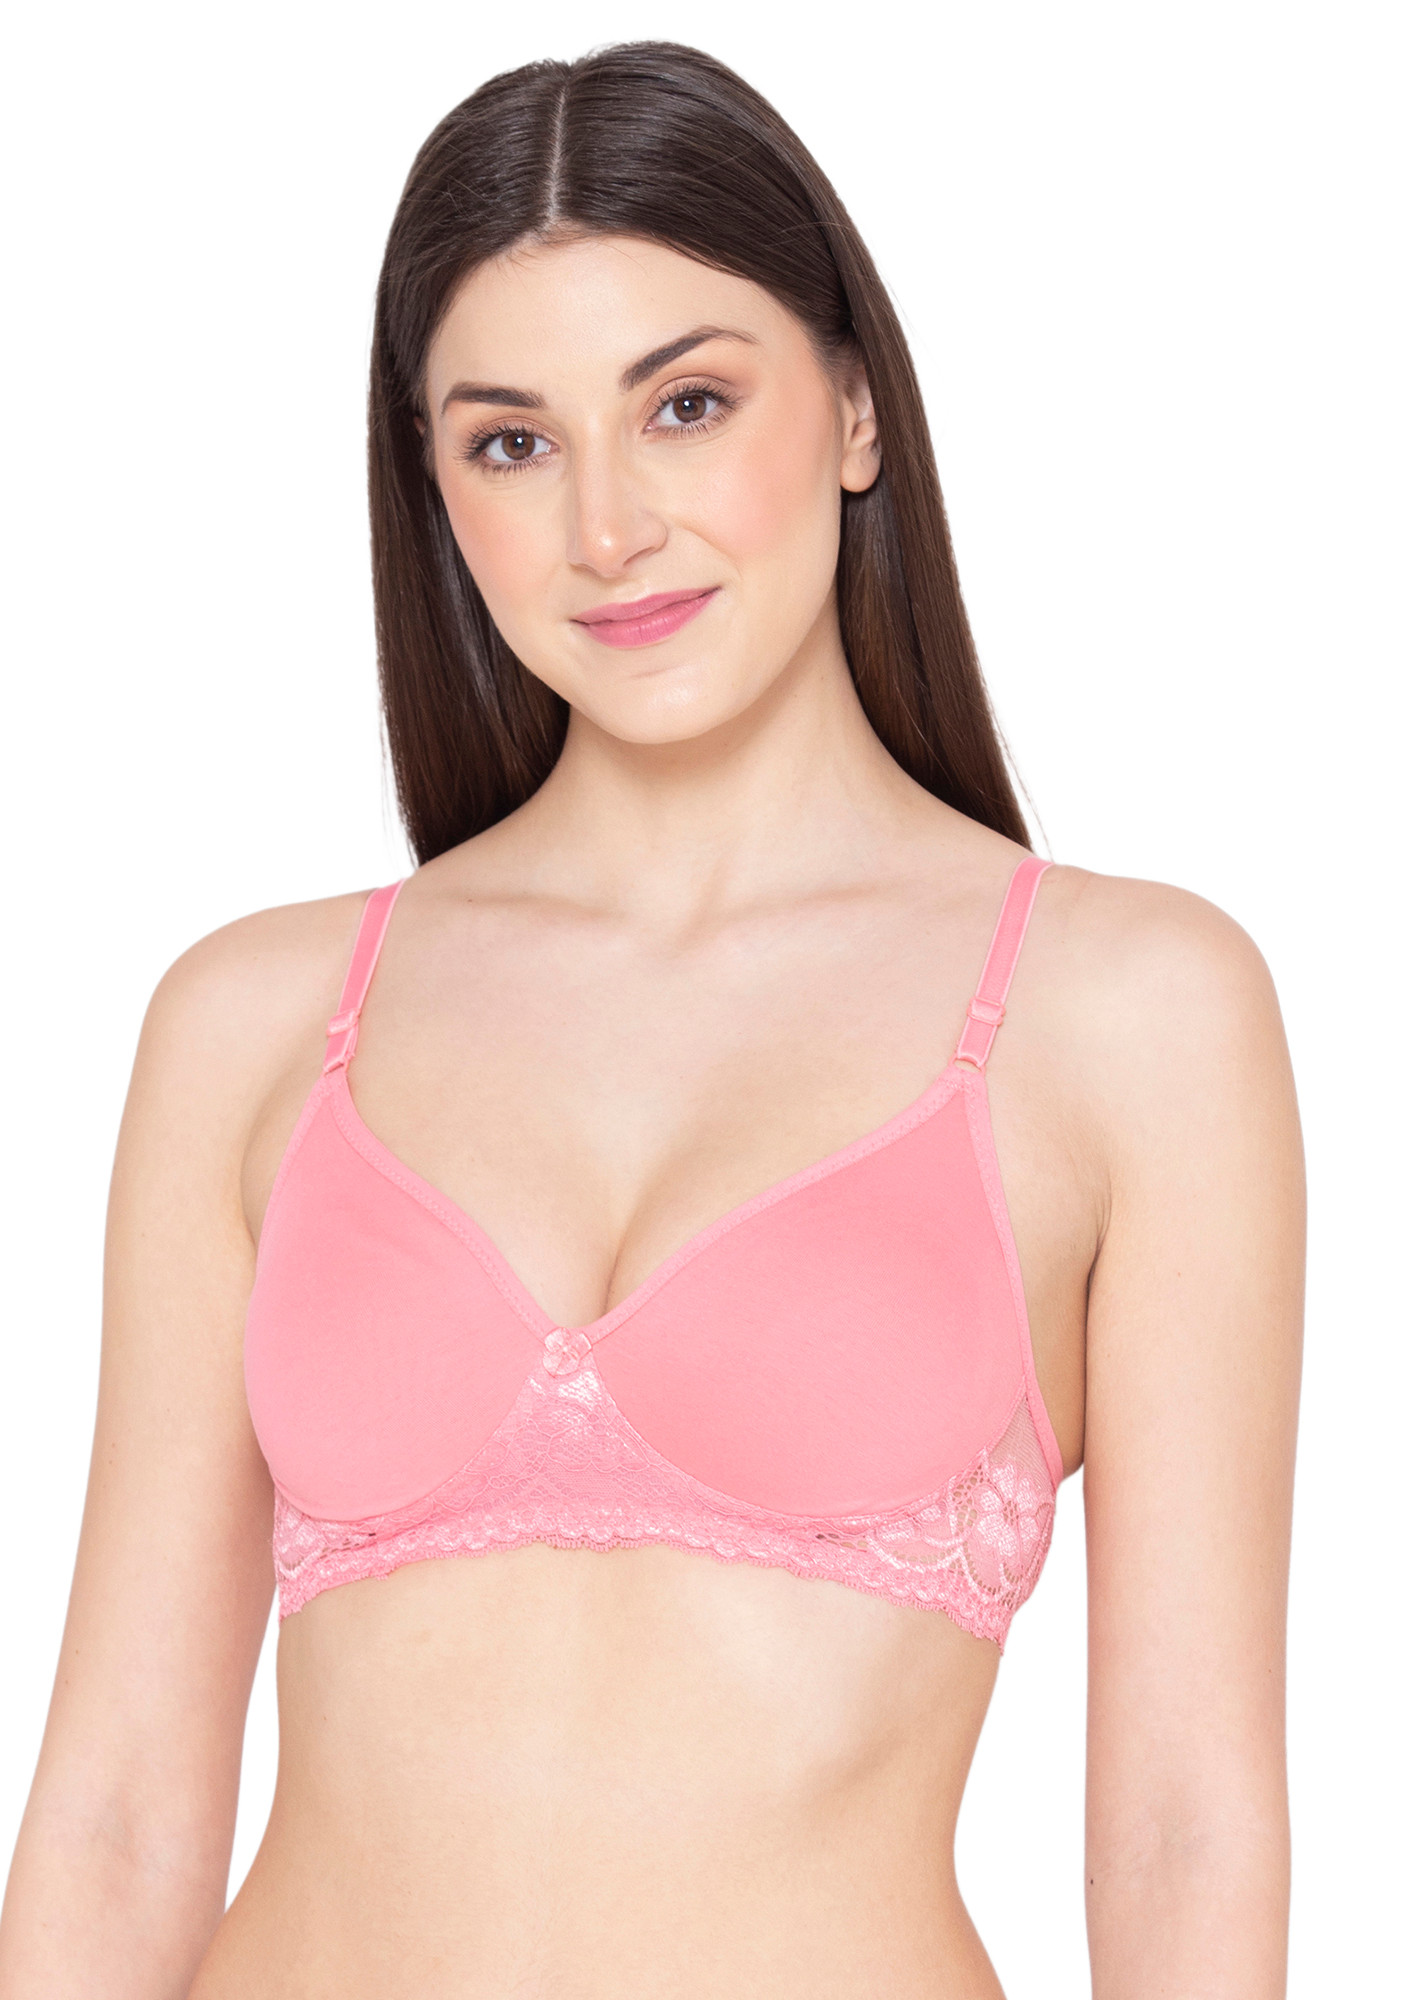 EVERYDAY WEAR FULL COVERAGE LACE PINK BRA